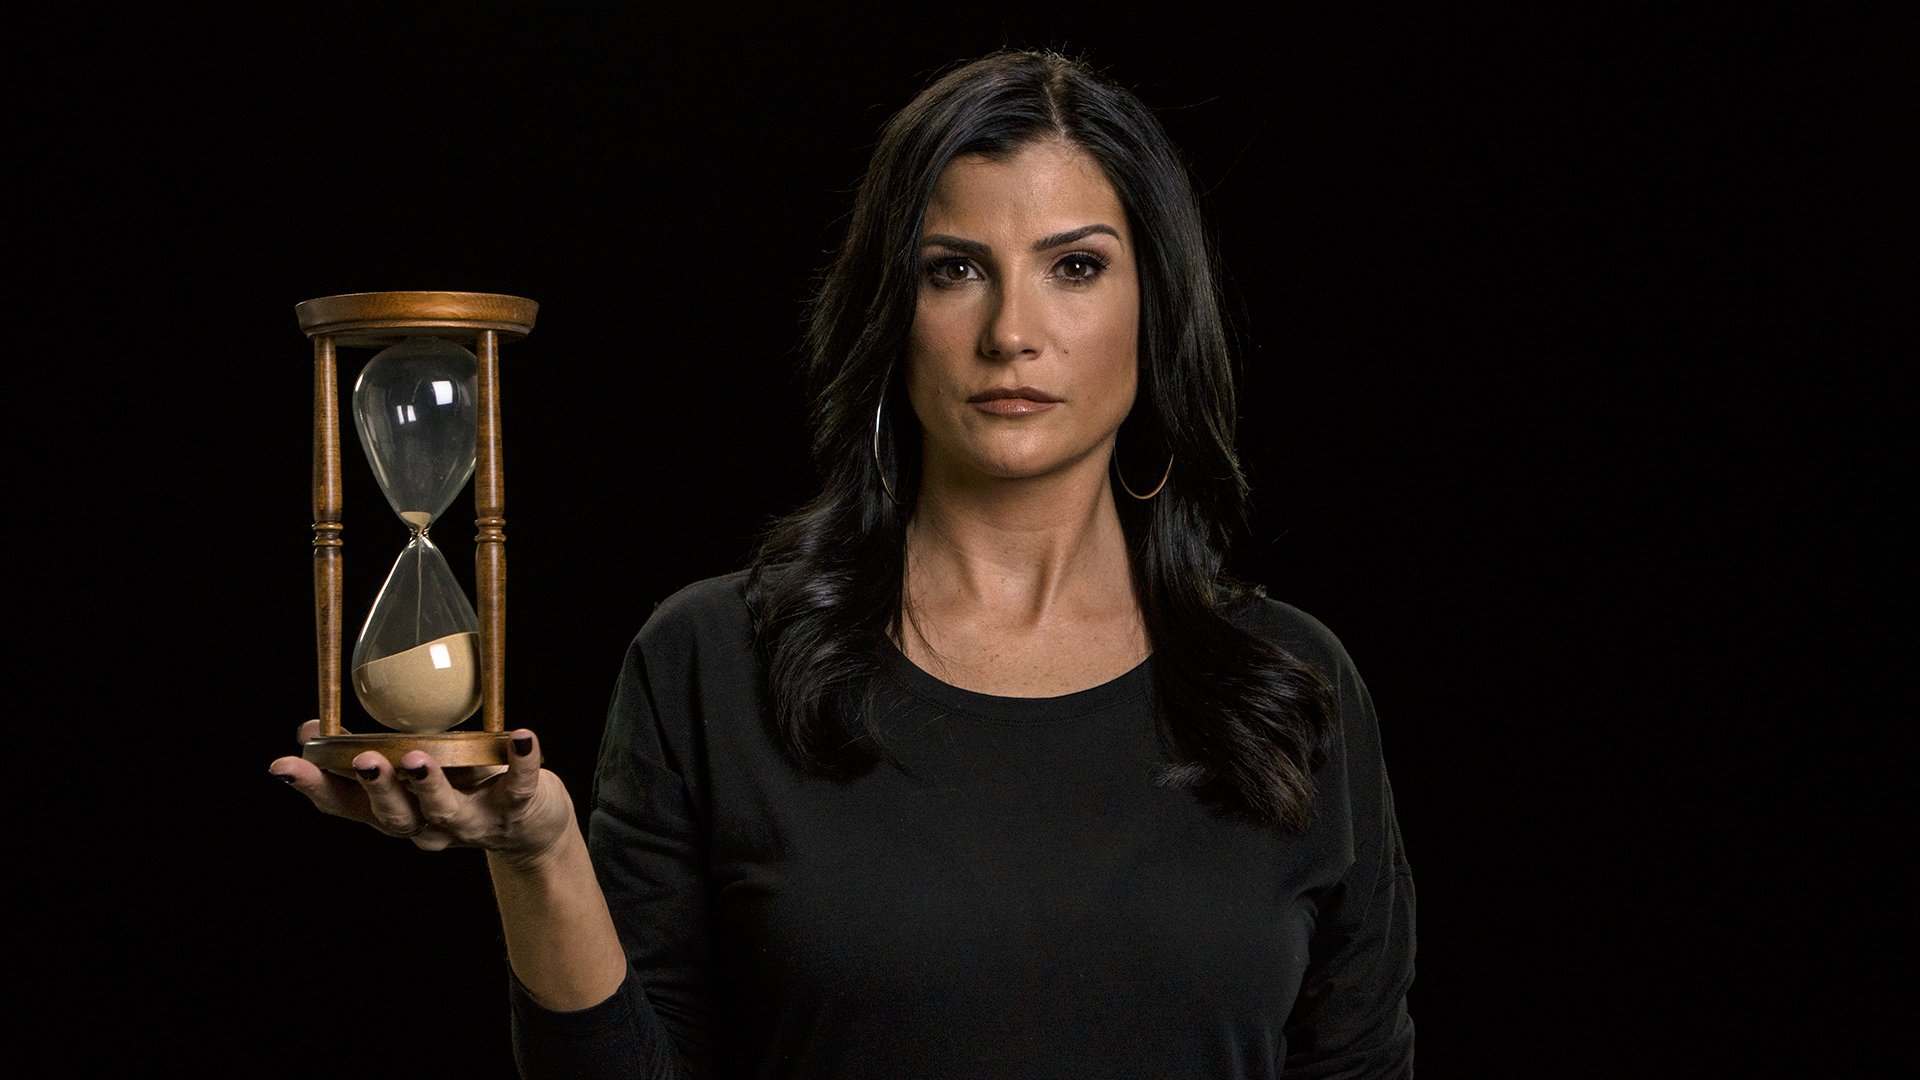 @NRA. s Dana Loesch says "time is up" for "every lying membe...